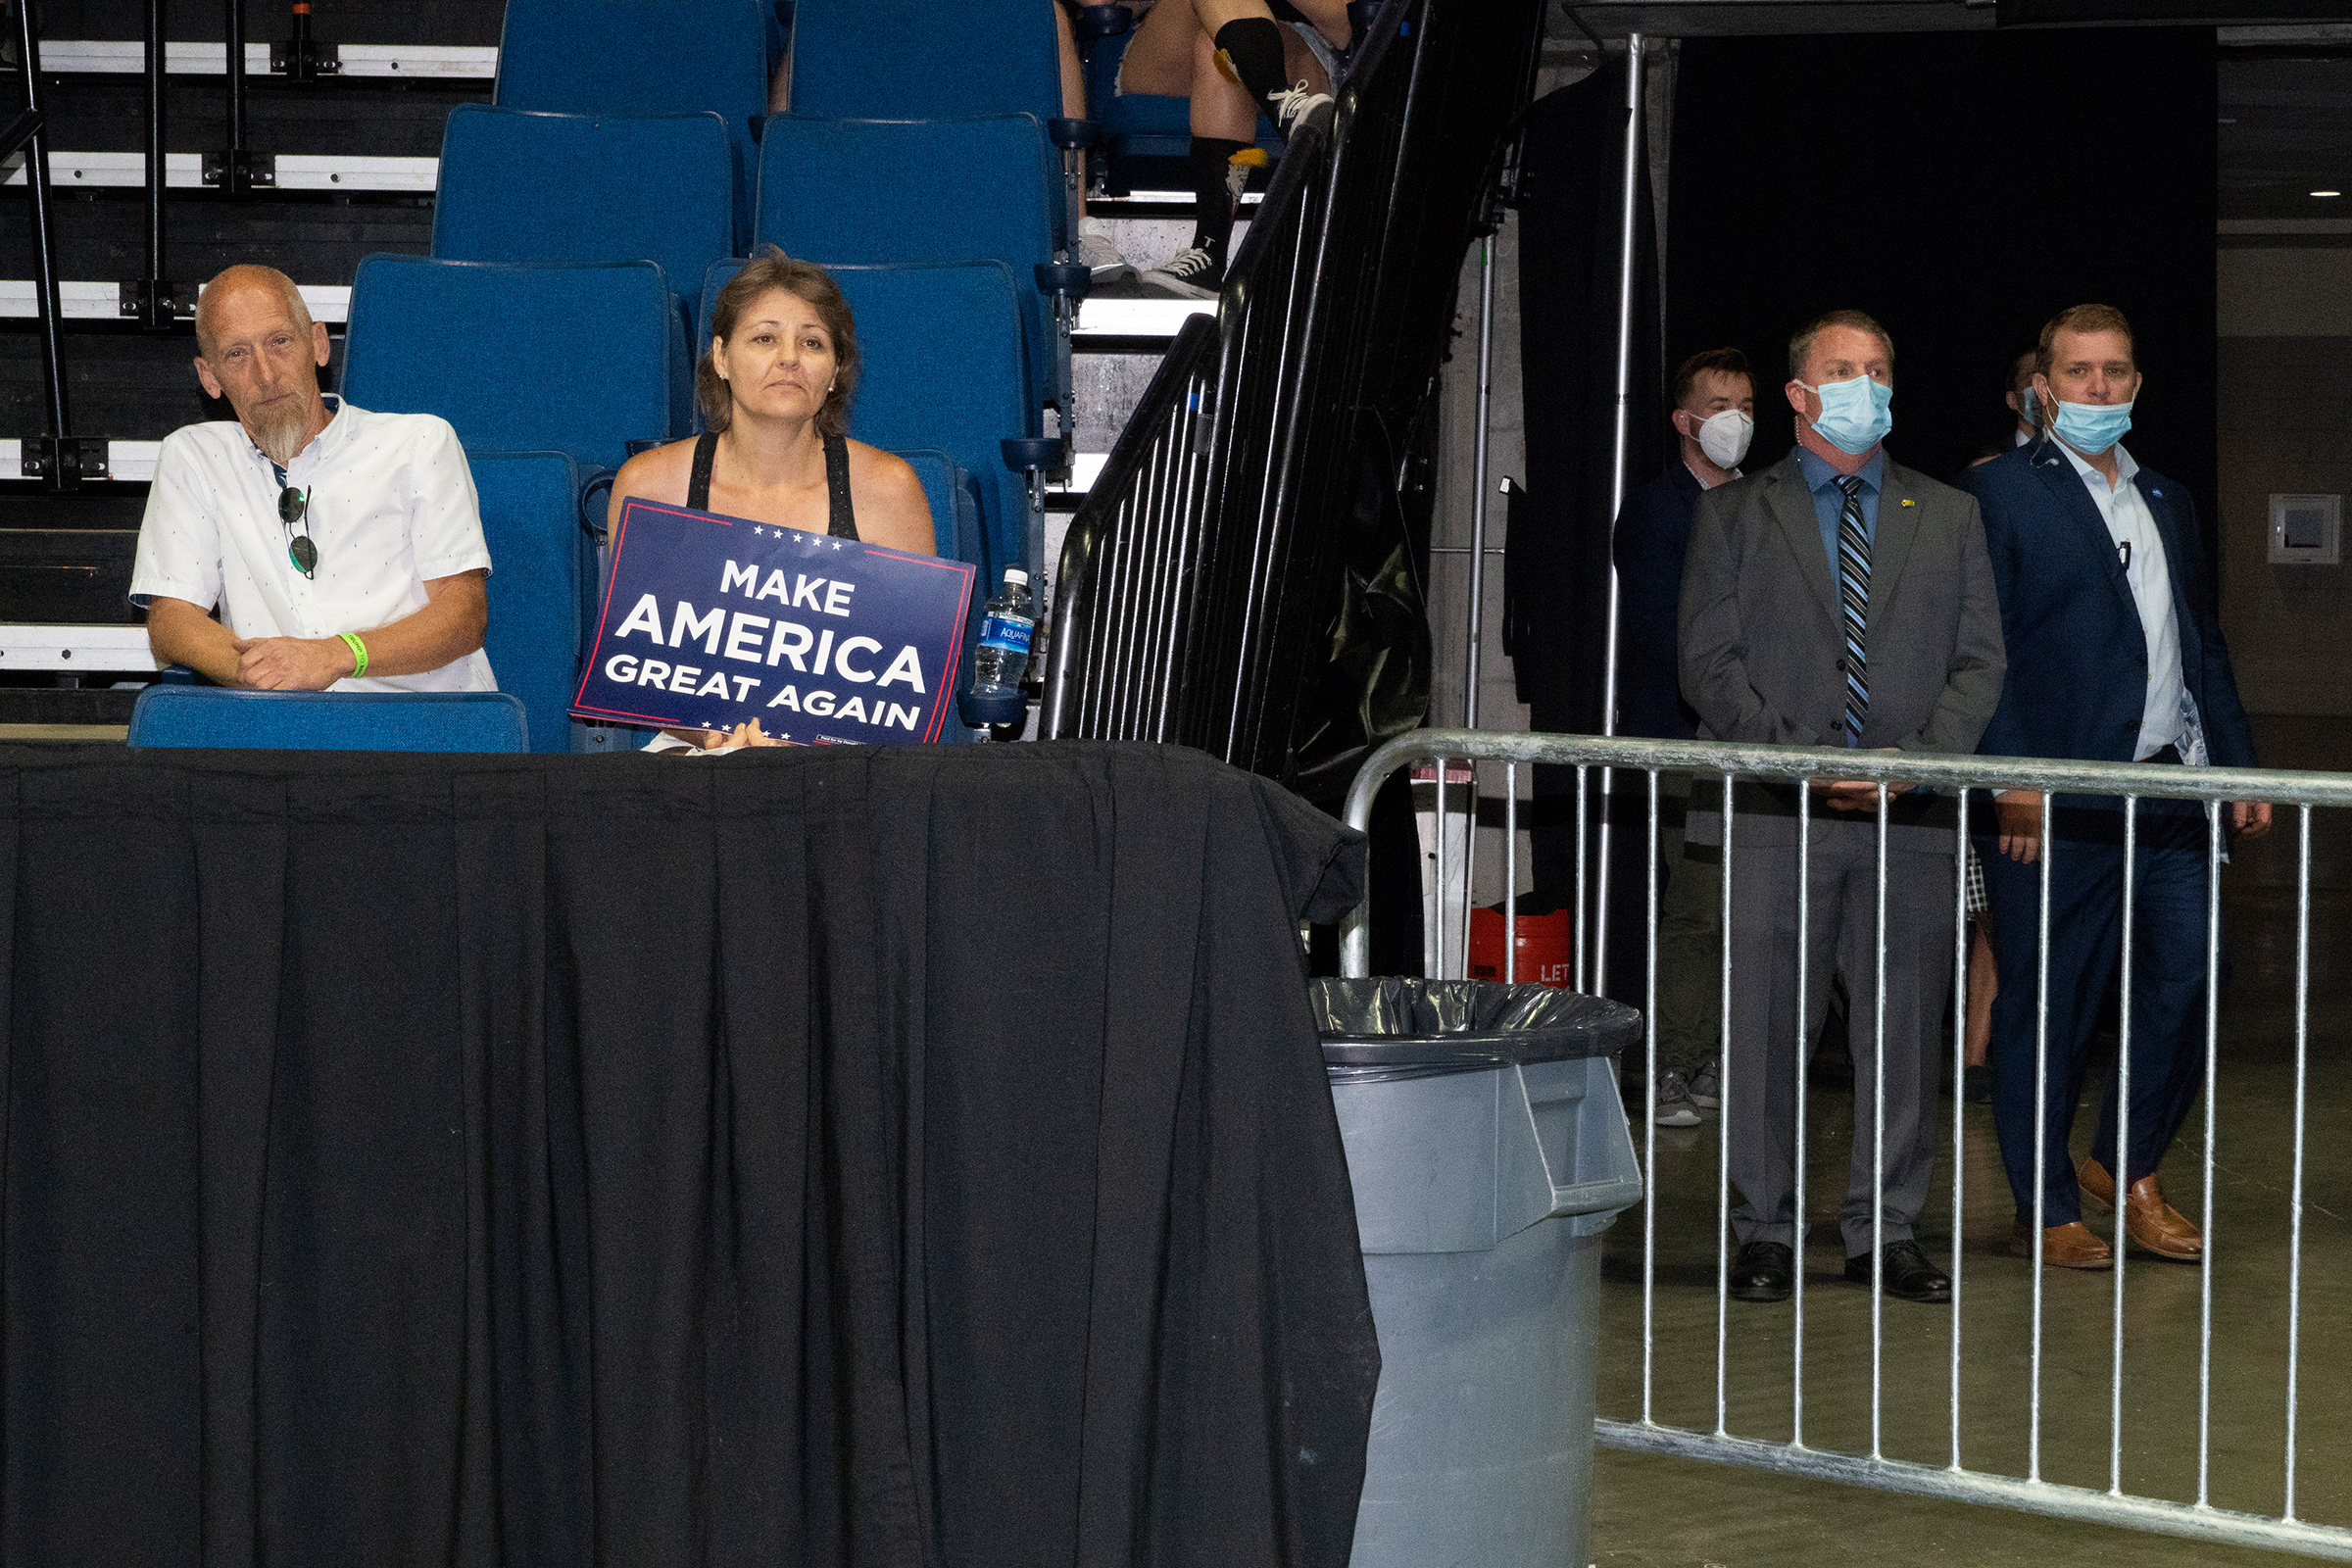 Trump supporters at his rally in Tulsa, Okla., on June 20 (Peter van Agtmael—Magnum Photos for TIME)